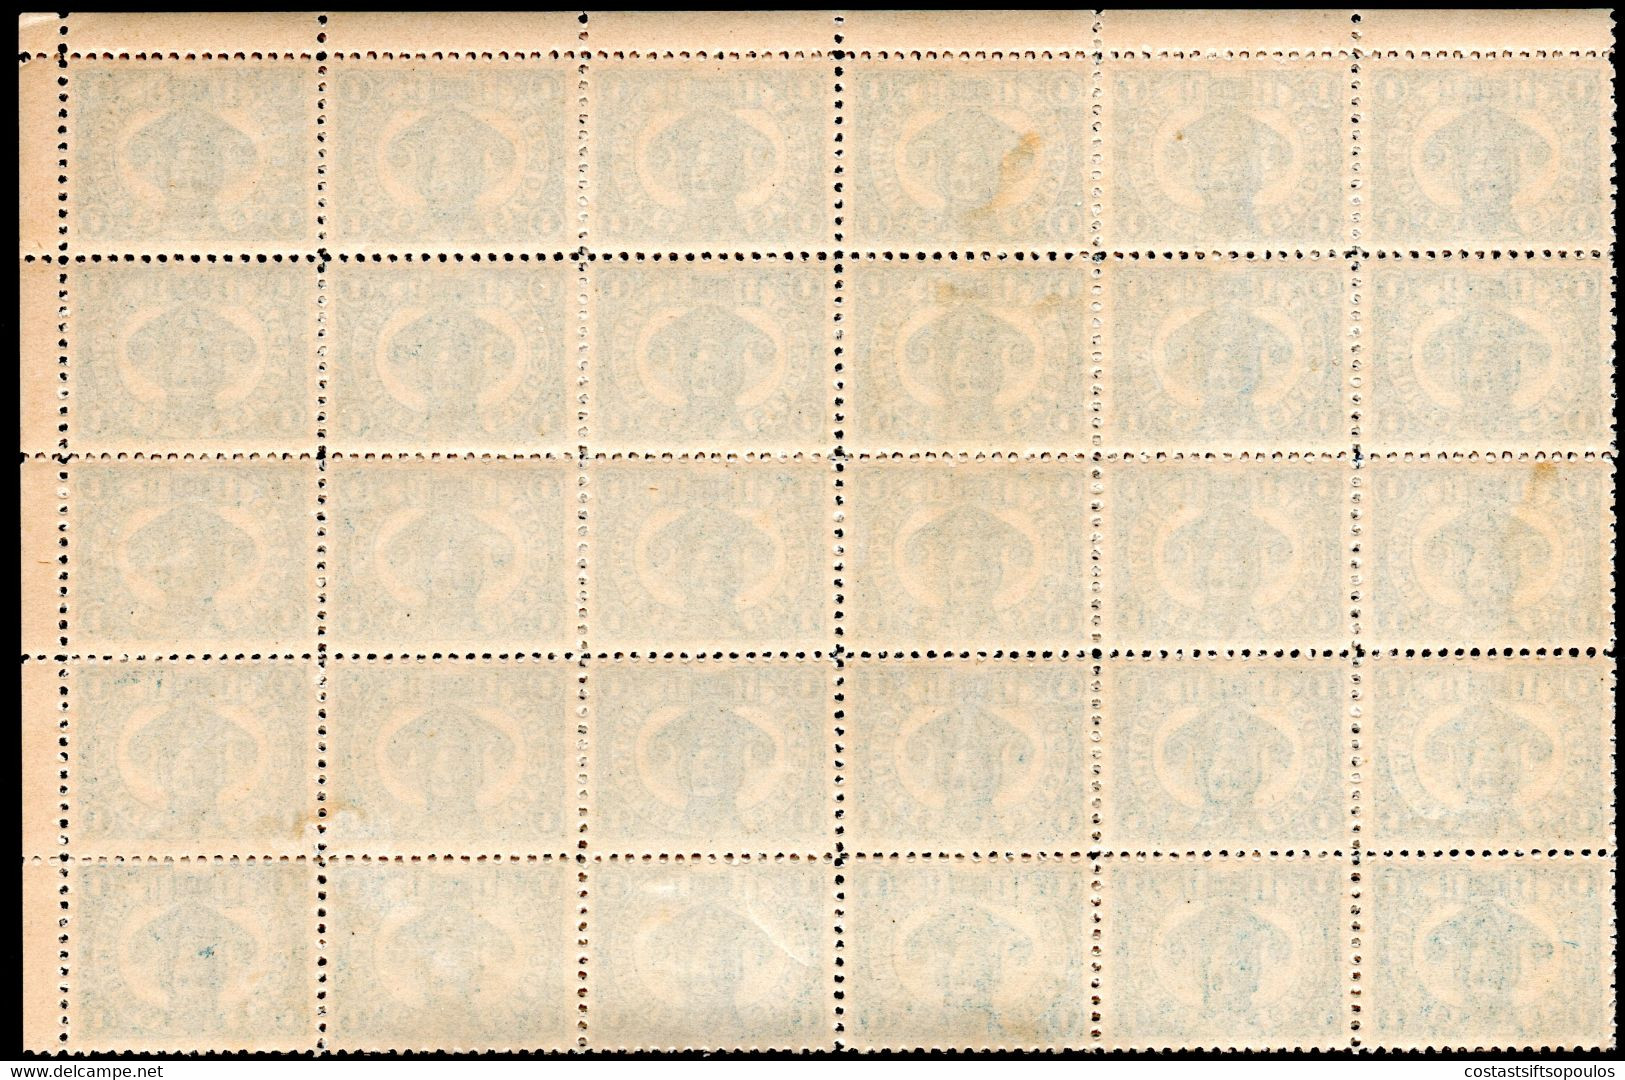 147.SWEDEN LOCAL,1887 STOCKHOLMS STADSPOST 1 ORE,MNH SHEET OF 60,FOLDED IN THE MIDDLE - Lokale Uitgaven